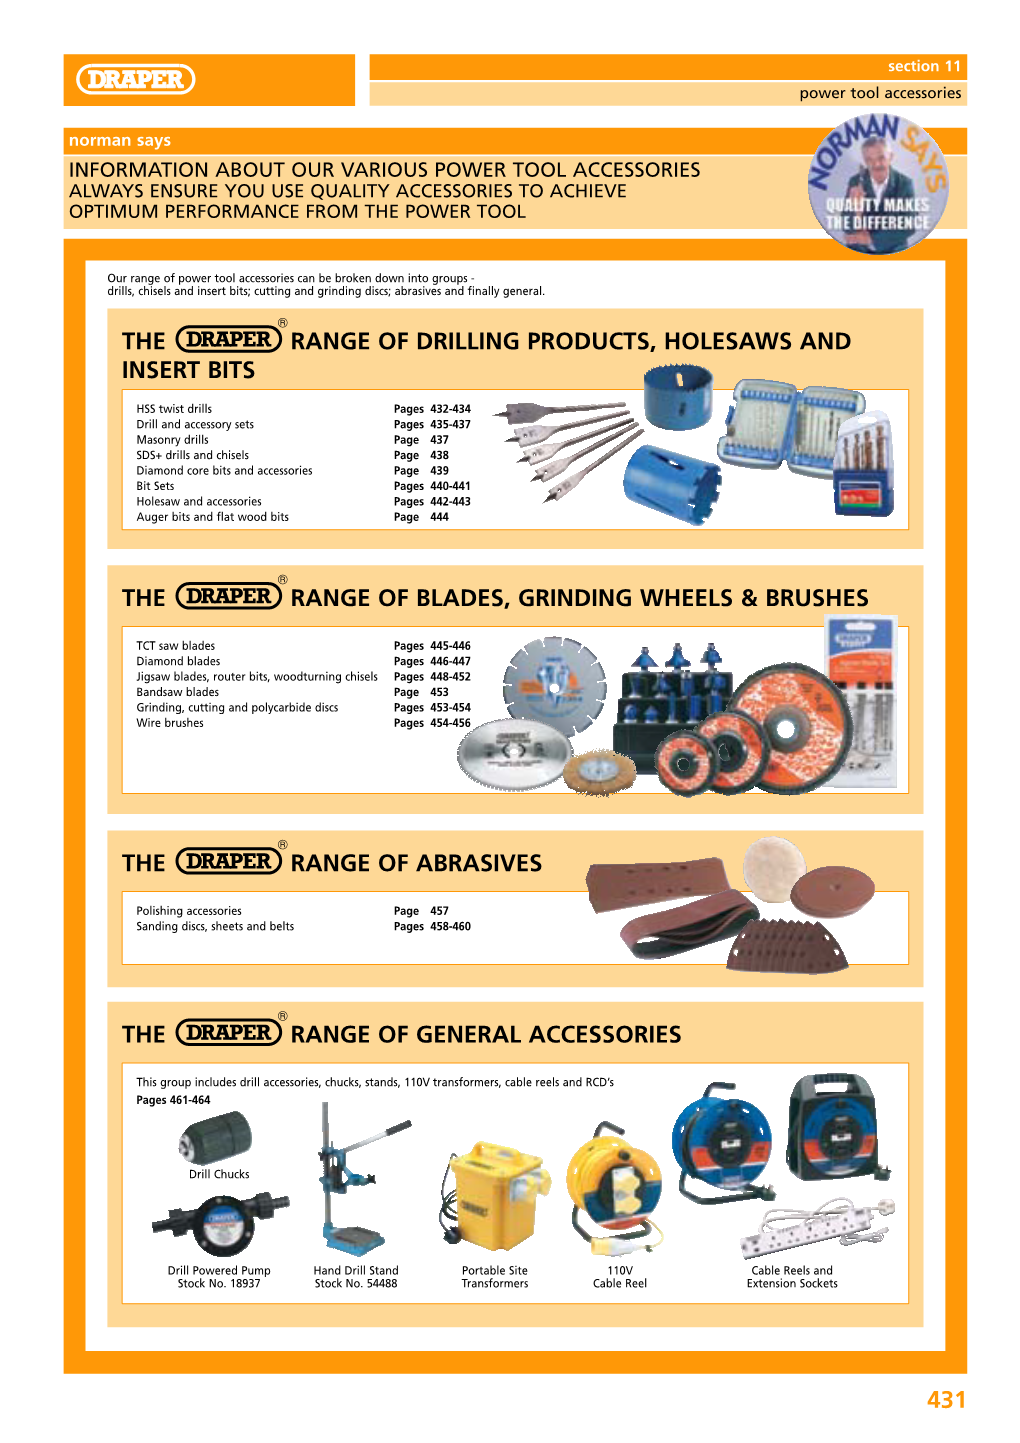 The Range of Drilling Products, Holesaws and Insert Bits 431 the Range of Blades, Grinding Wheels & Brushes